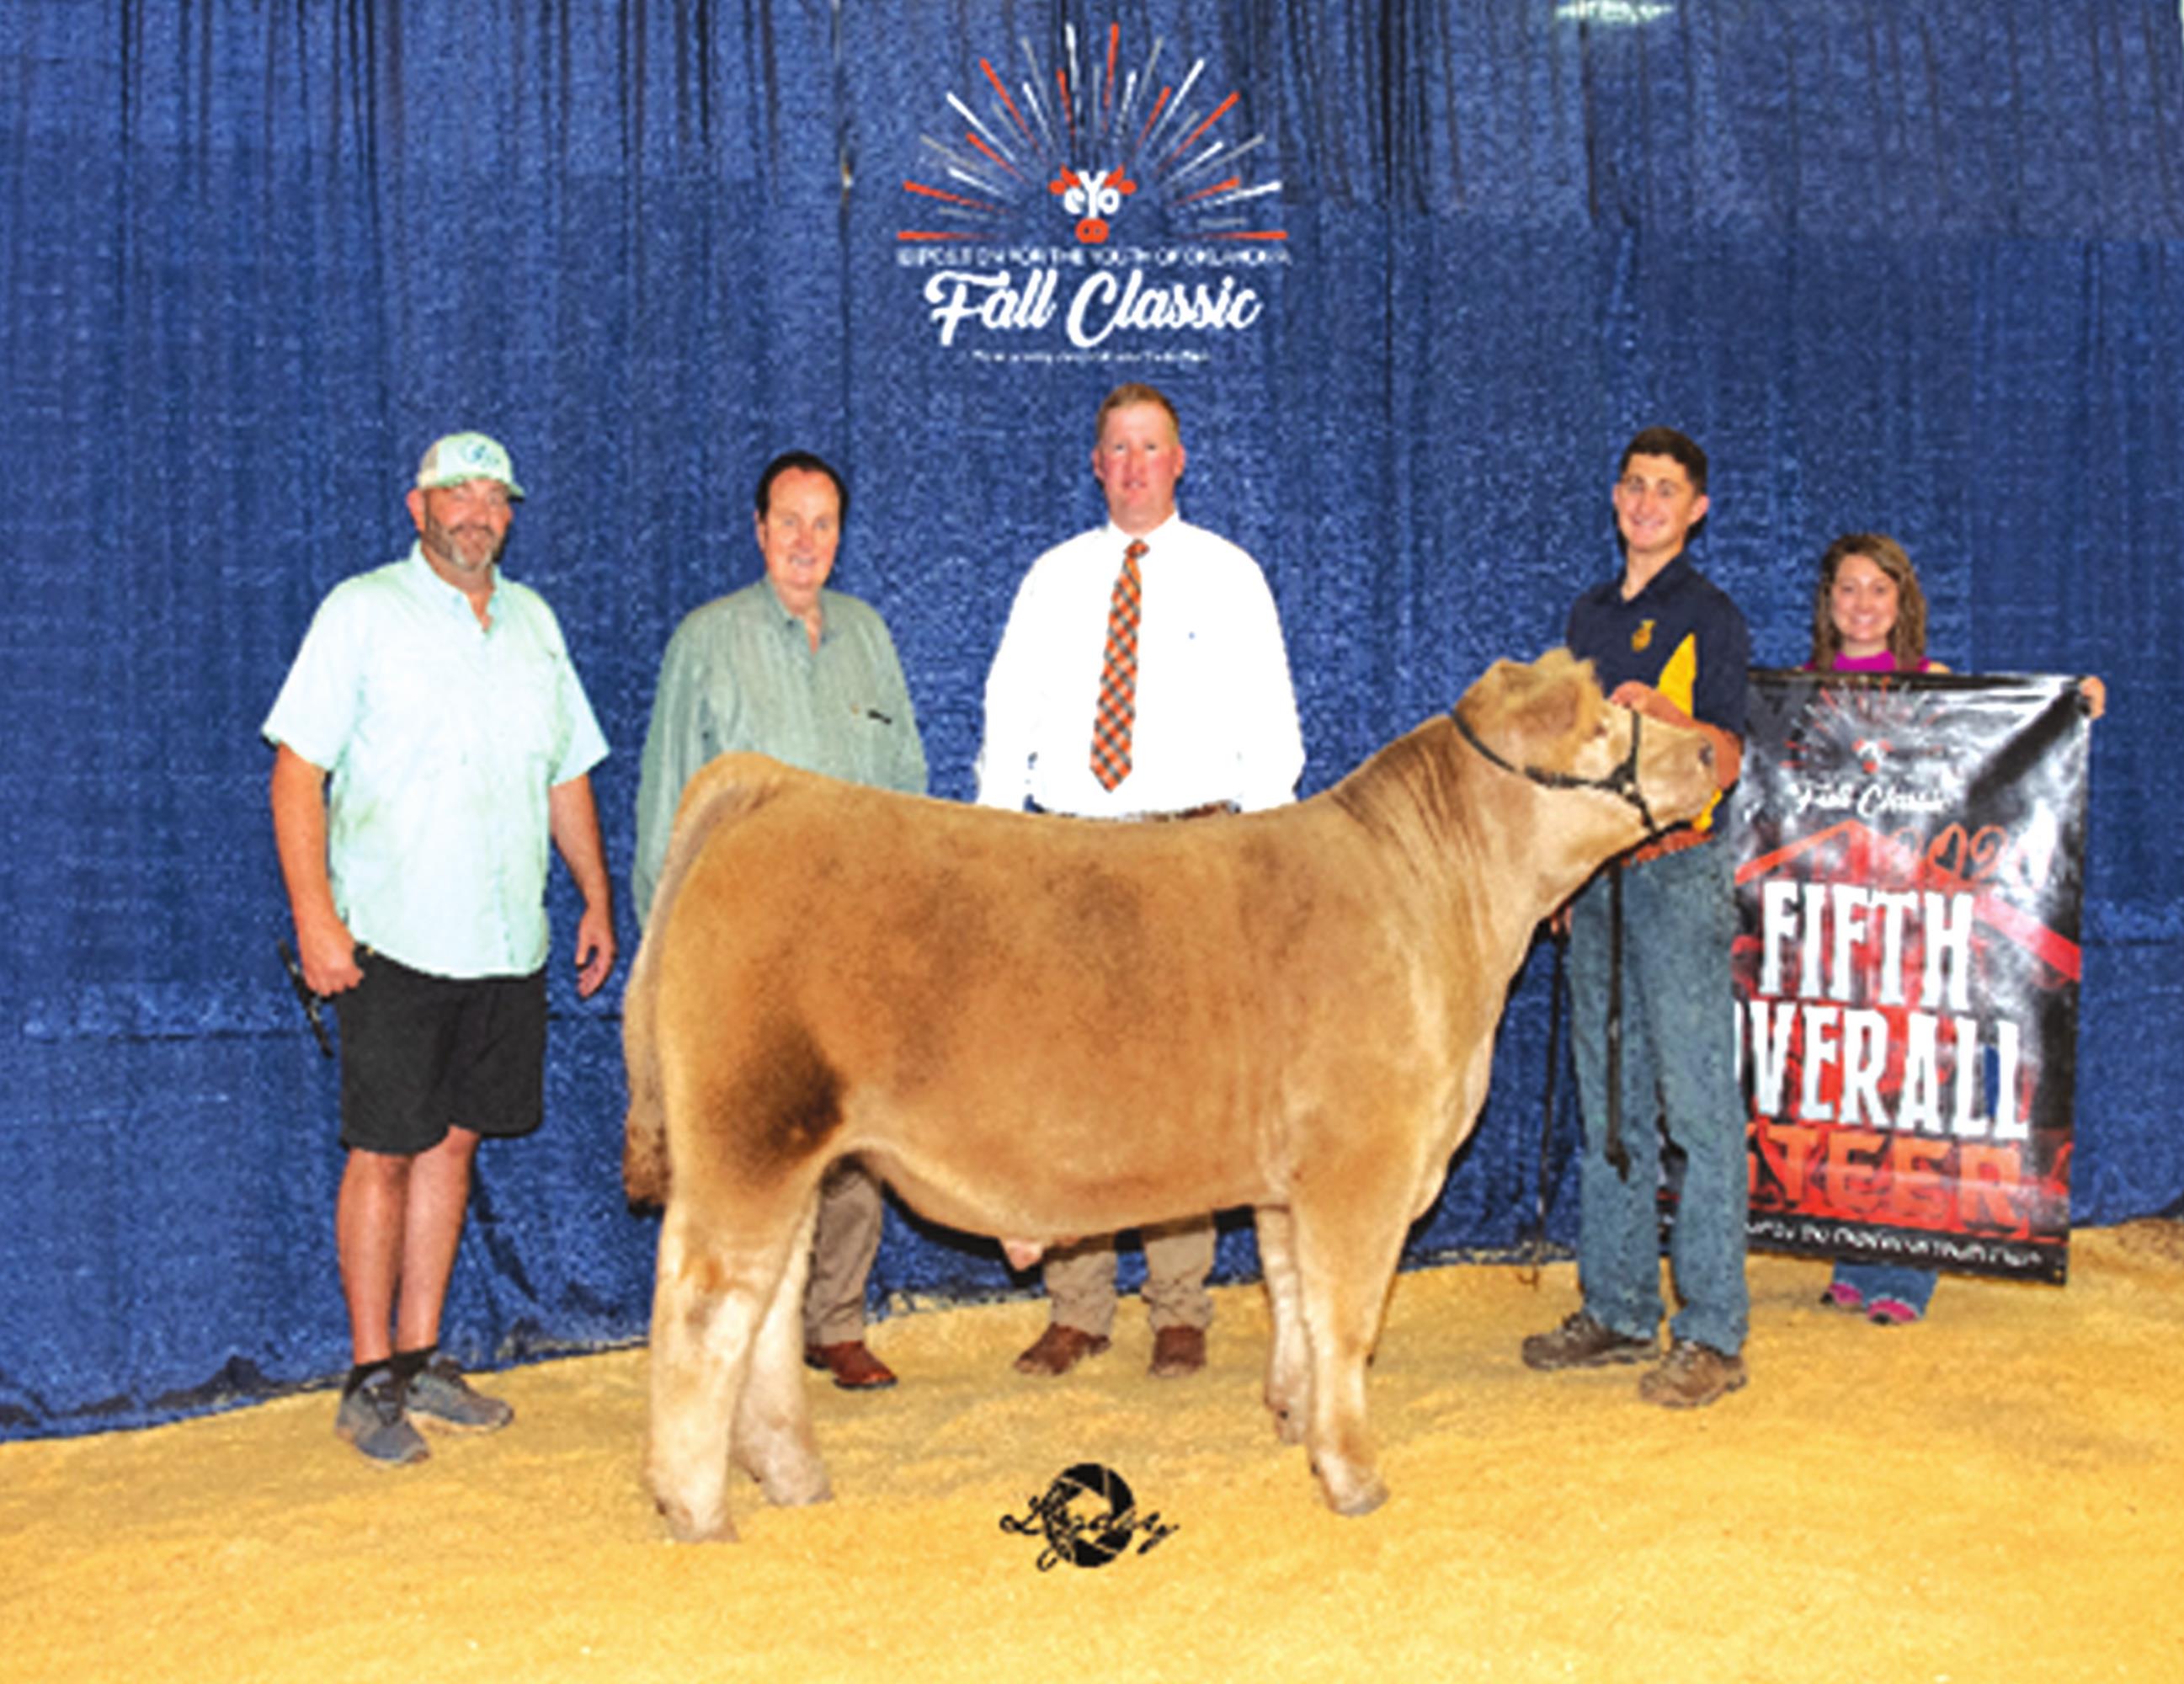 Grady Chaplin, second from right, is seen with his steer who placed fifth overall at the Exhibition of Youth Oklahoma Fall Classic Show. Provided